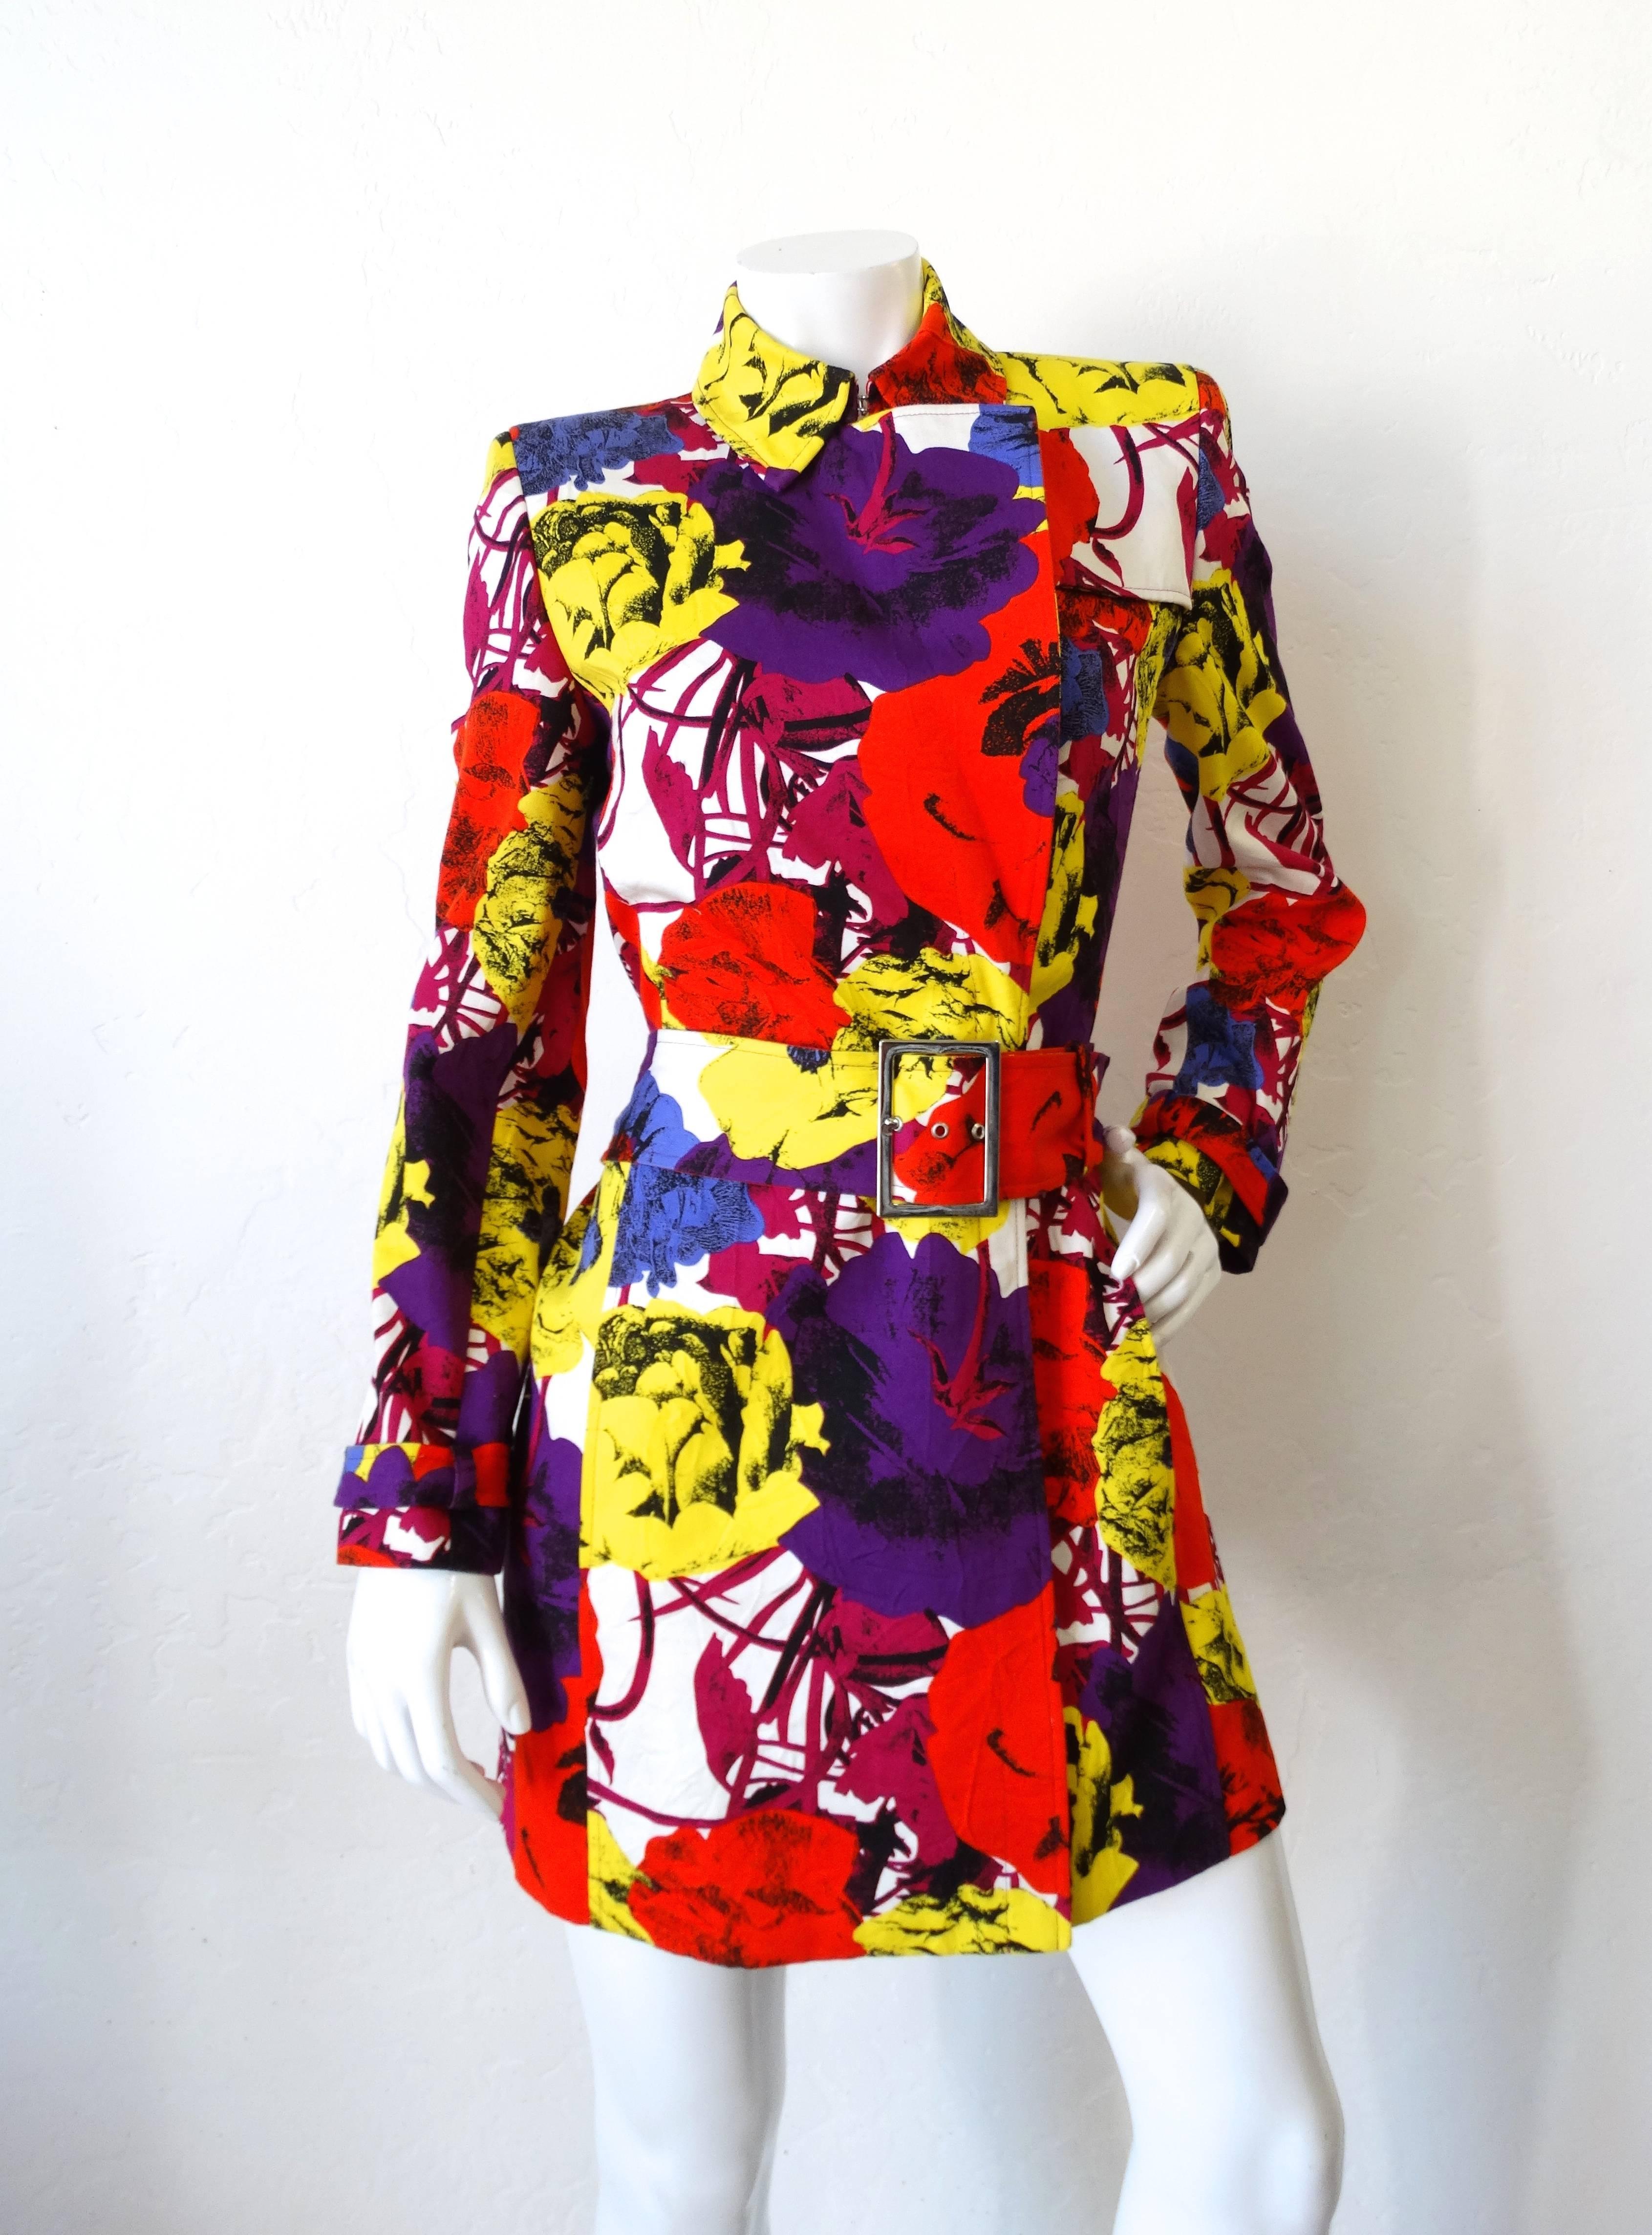 Incredible 1990s Gianni Versace Pop Art floral trench coat! Mini trench coat fit with belted waist and cuffs. Collar can be worn folder over, or closed for a more mod look (pictured both ways.) Super bold pop art print with floral motifs throughout